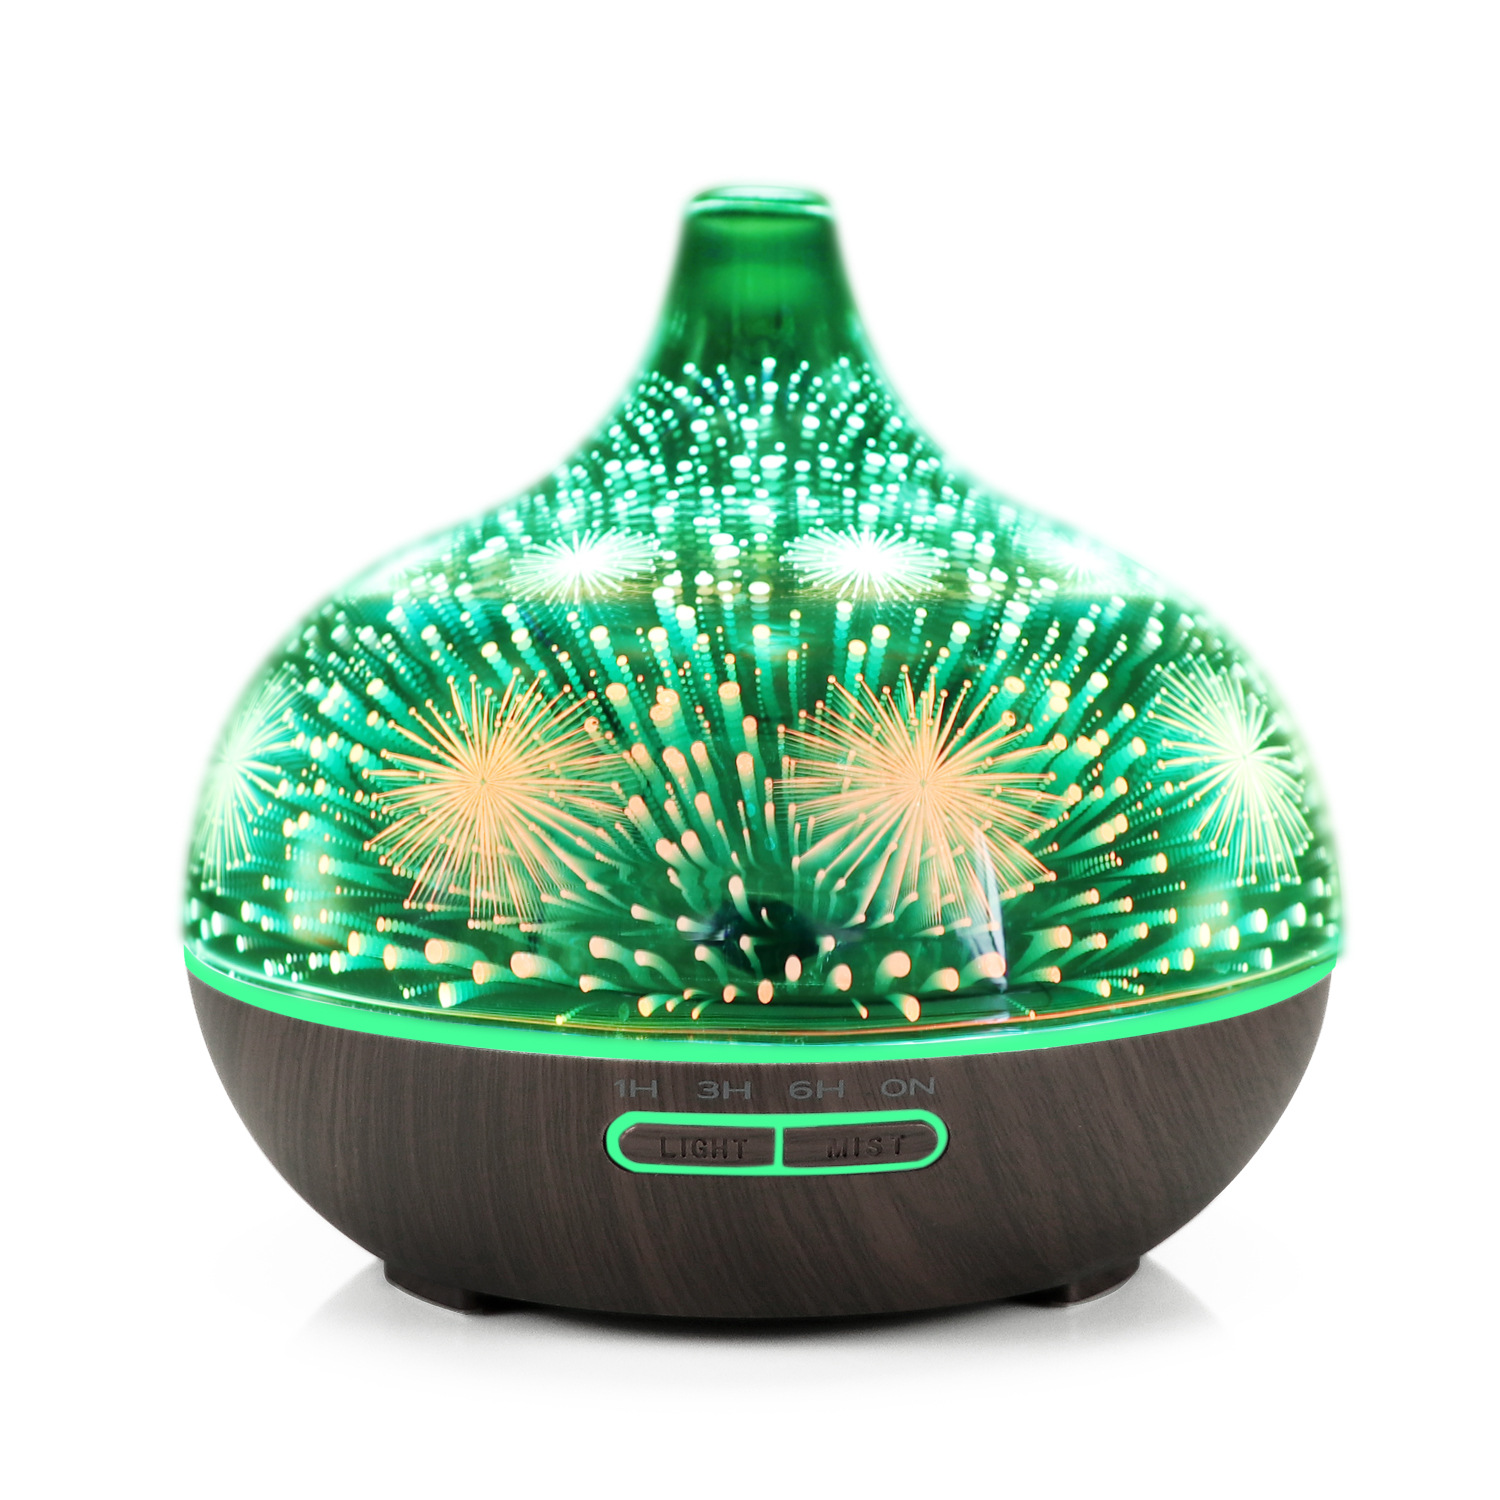 Creative New Ultrasonic Atomization 3D Glass Aroma Diffuser Gift Colorful Fireworks Starry Sky Humidifier